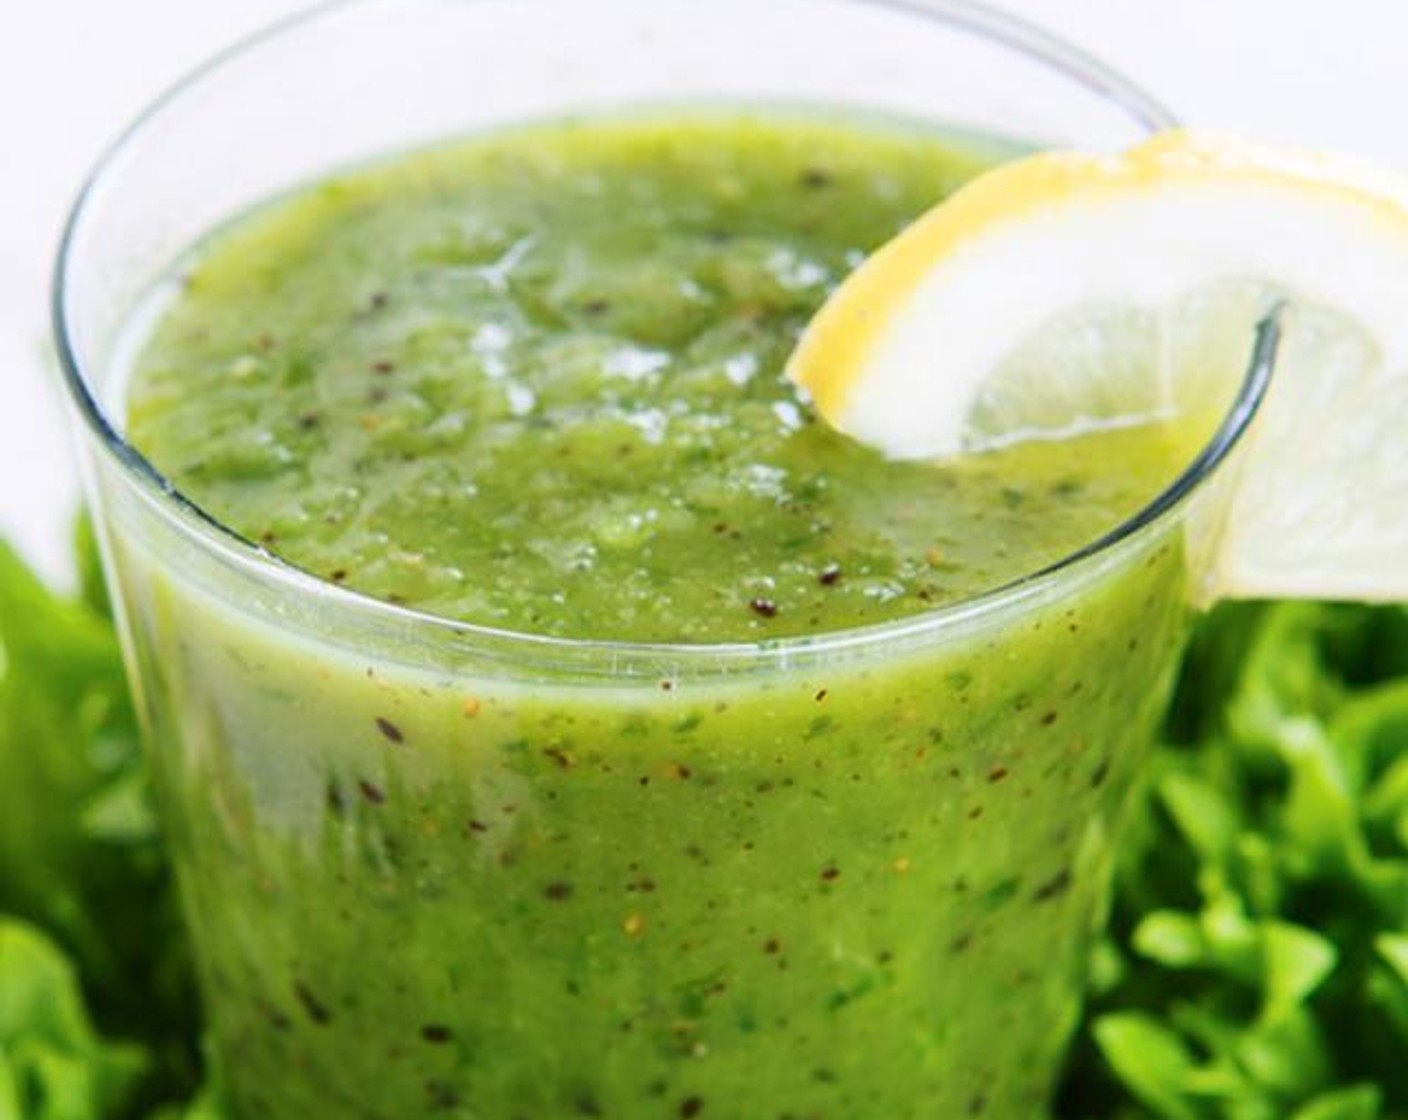 Kimberly Snyder’s Glowing Green Smoothie